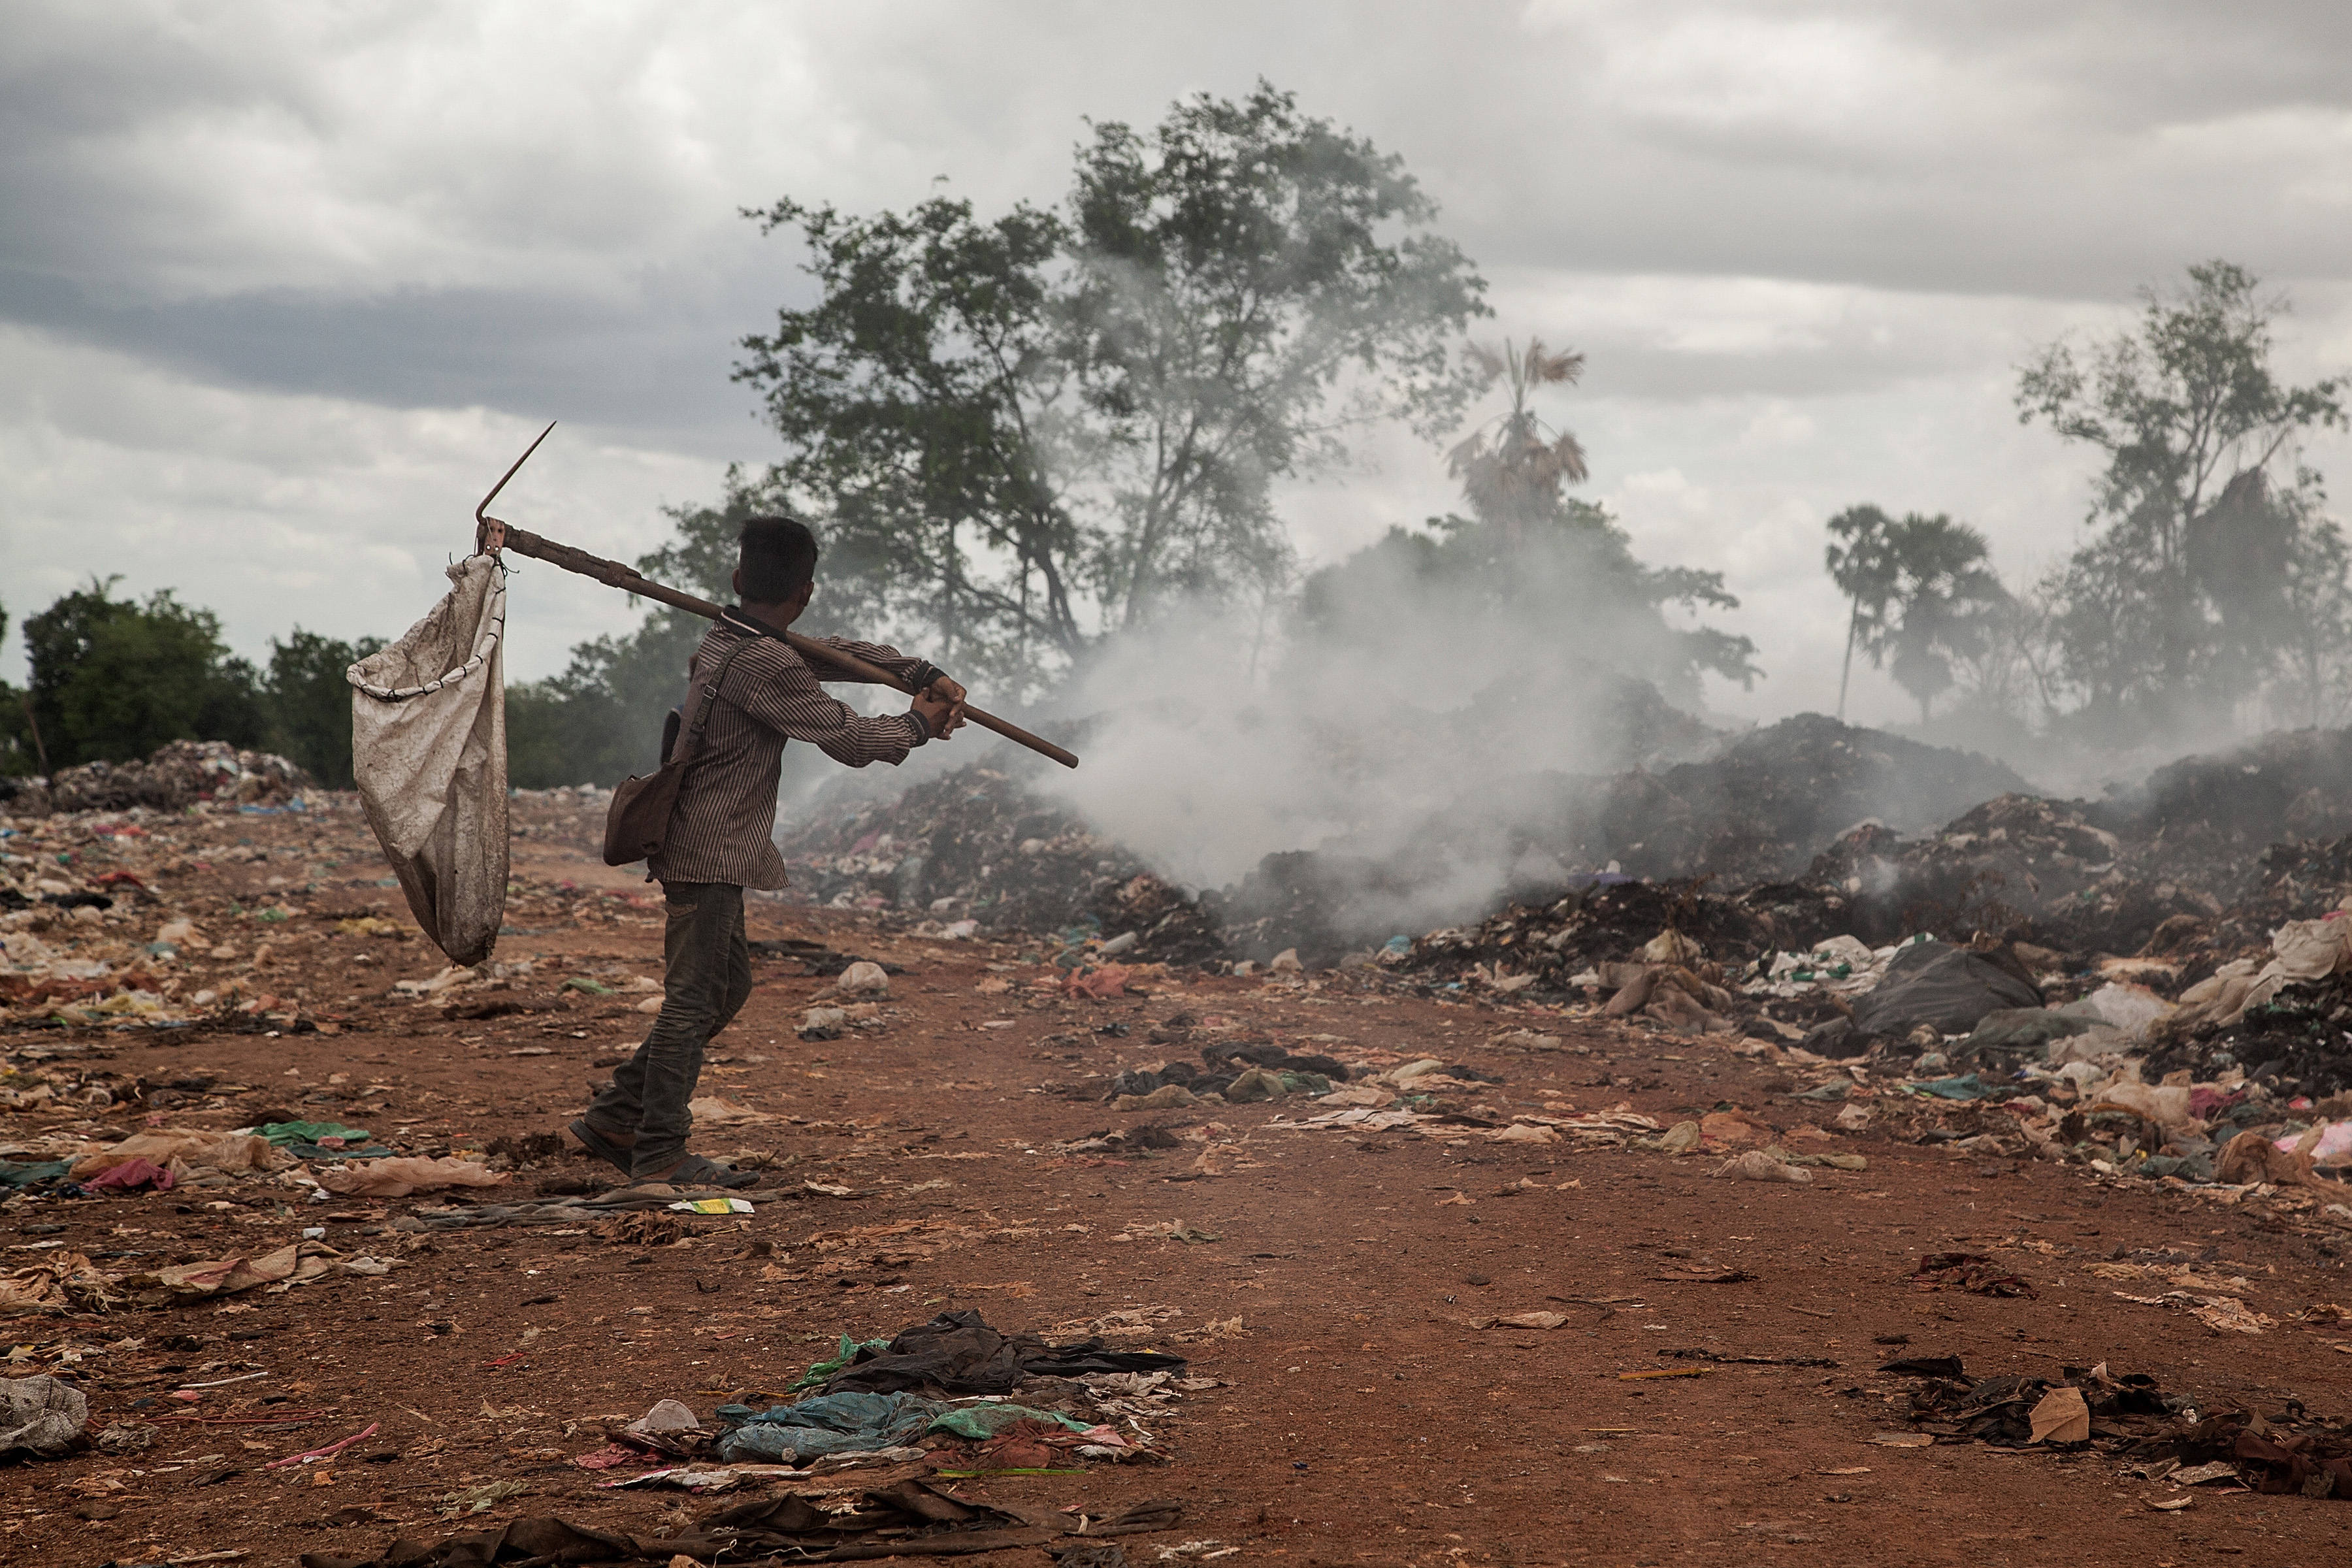 A young scavenger walks near a burning pile of trash in the Anlong Pi landfill on June 11, 2014 in Siem Reap, Cambodia. (Omar Havana—Getty Images)